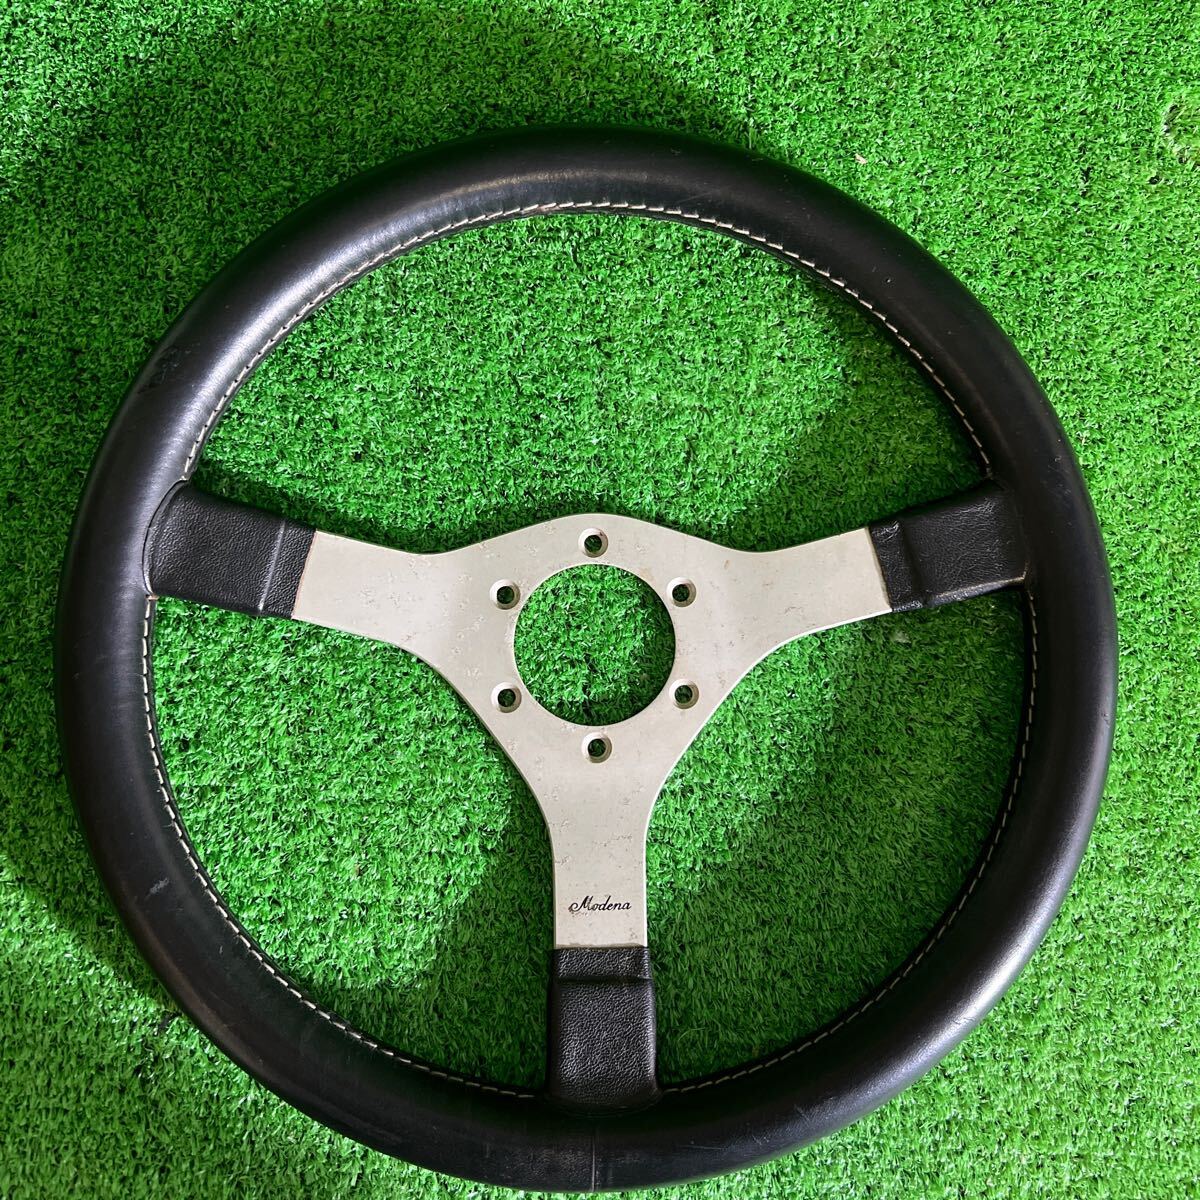 Modena steering gear steering wheel that time thing old car 